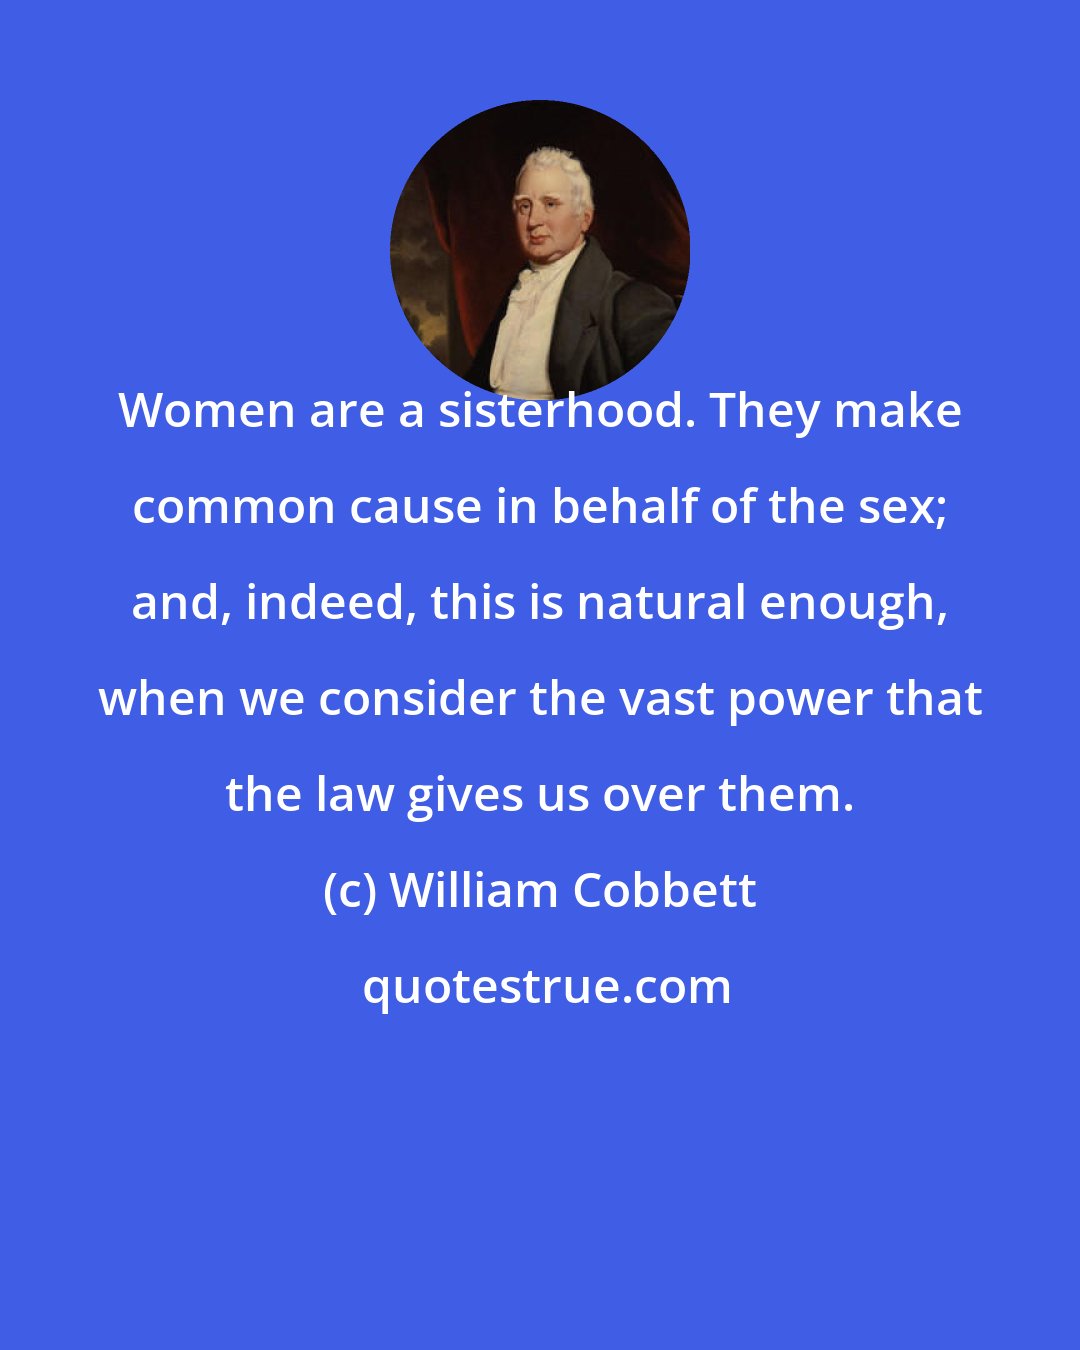 William Cobbett: Women are a sisterhood. They make common cause in behalf of the sex; and, indeed, this is natural enough, when we consider the vast power that the law gives us over them.